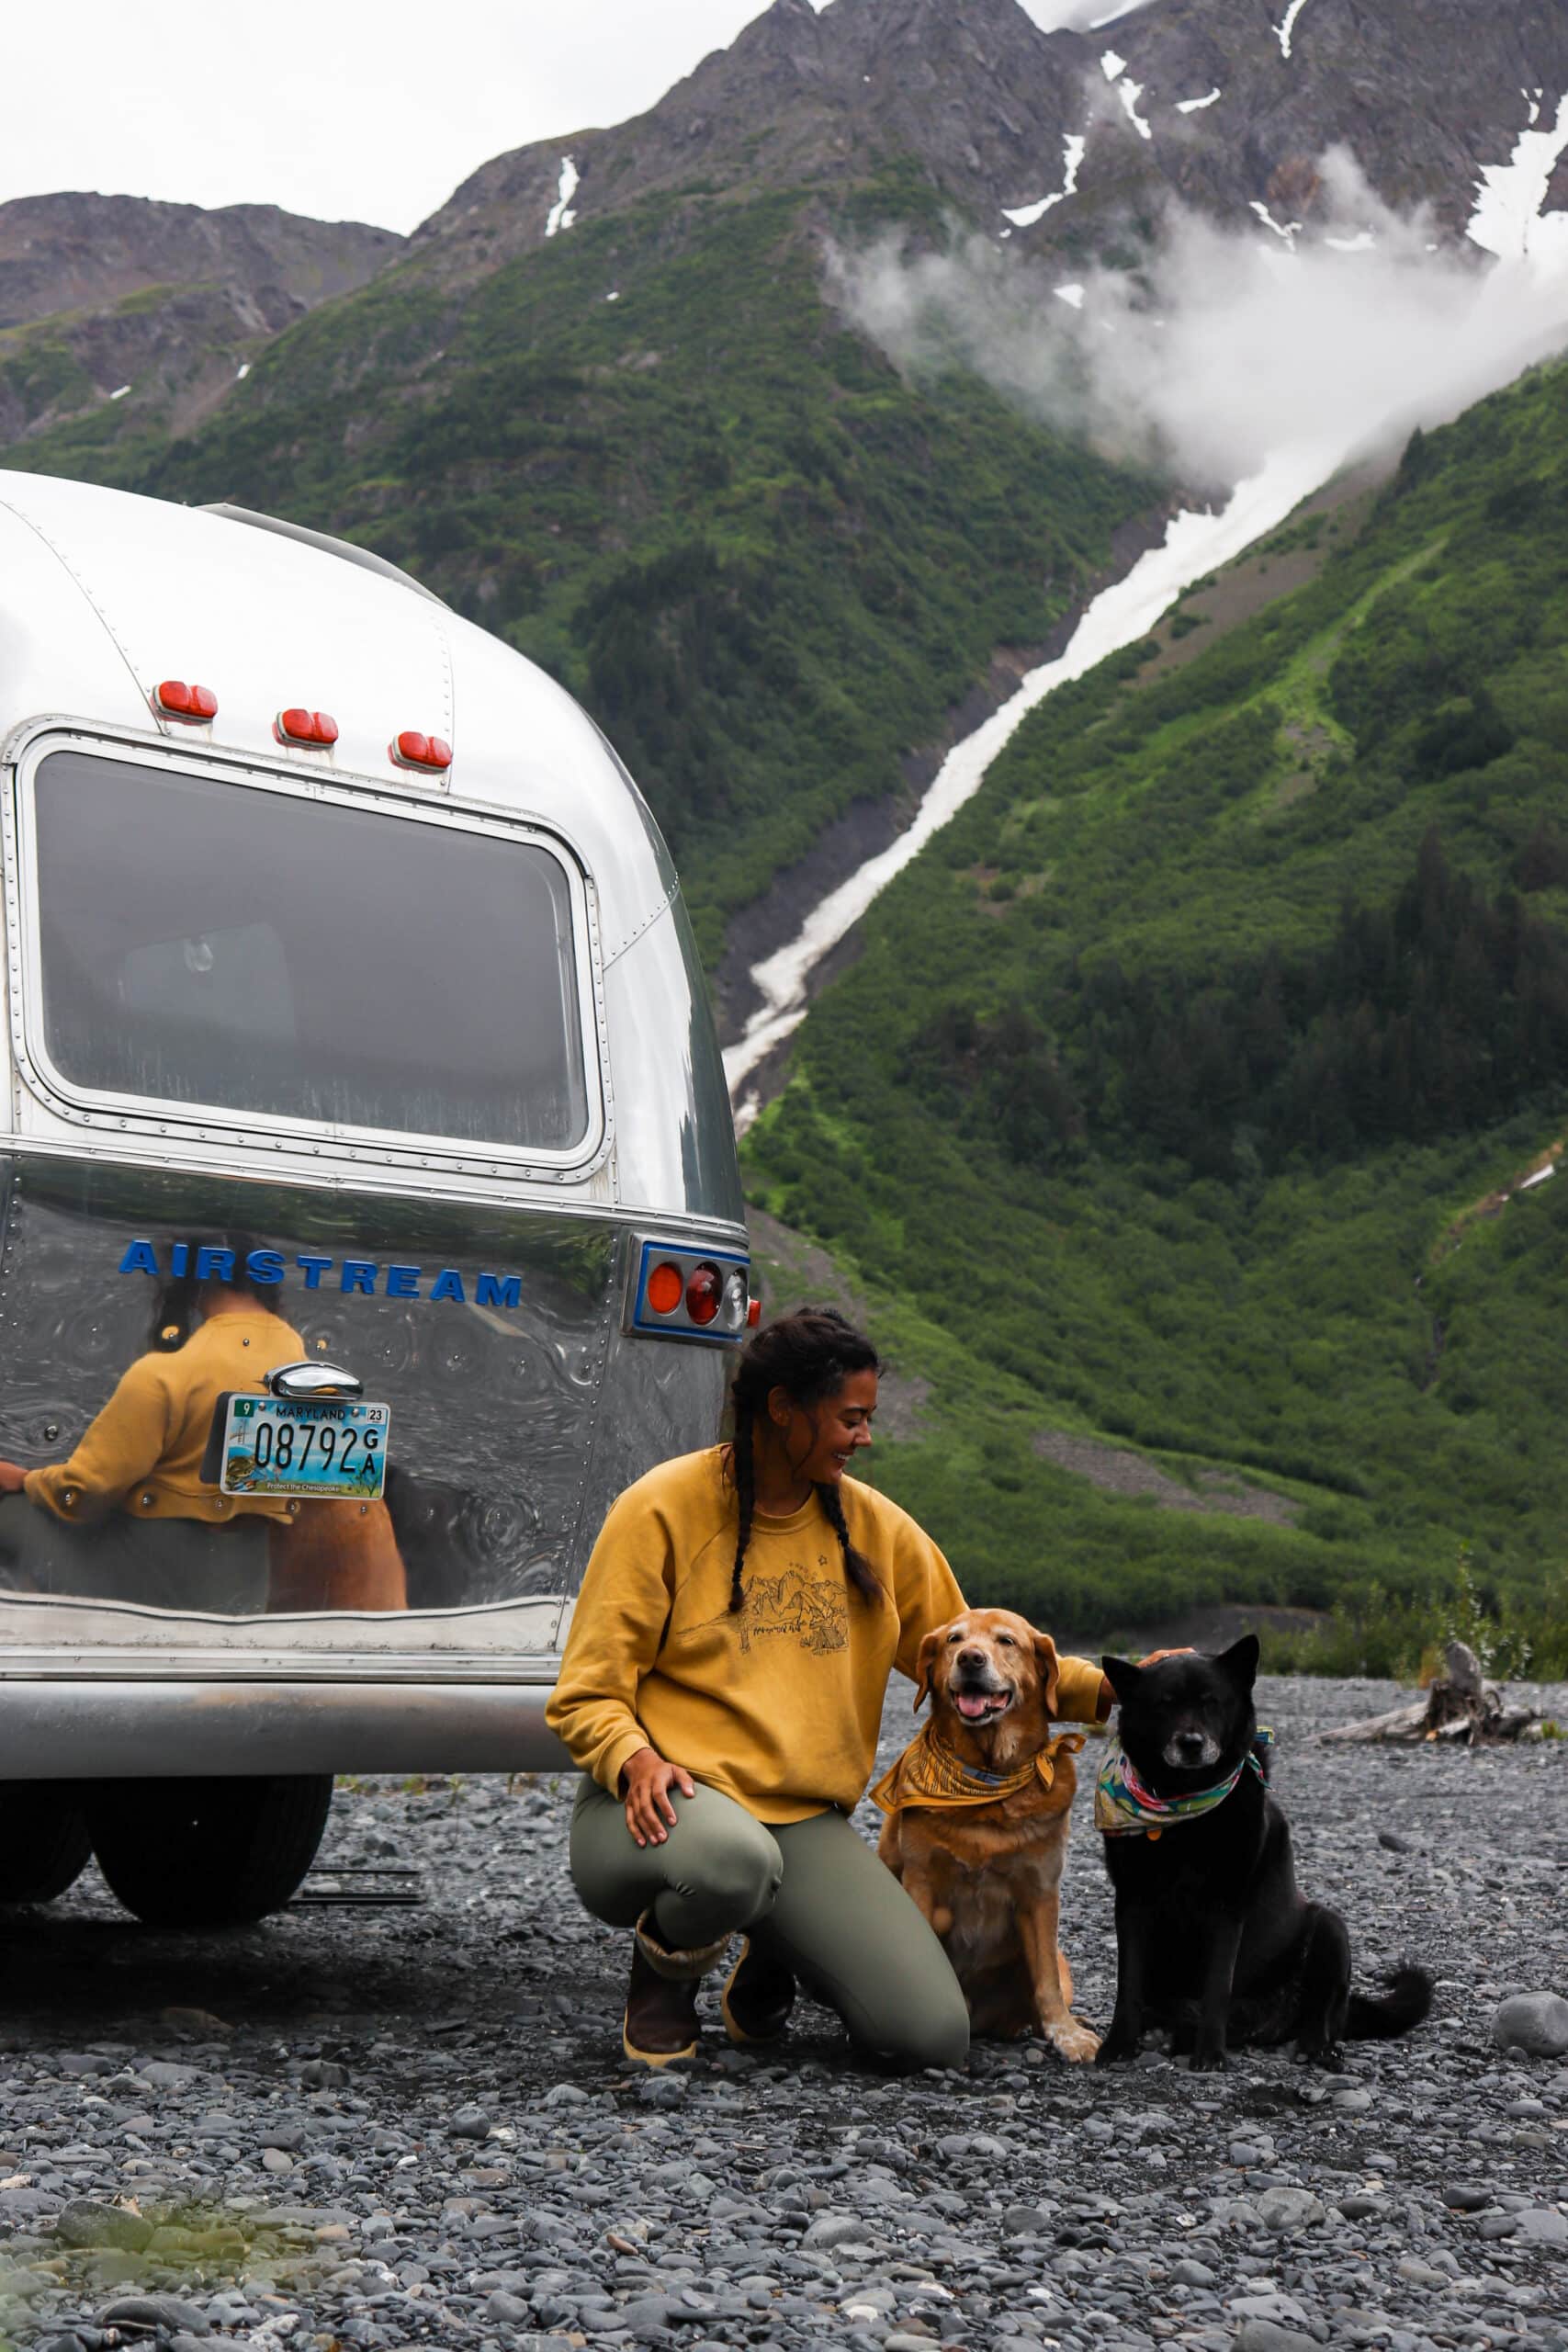 Danielle, Trip, and Missy with the Airstream in Alaska